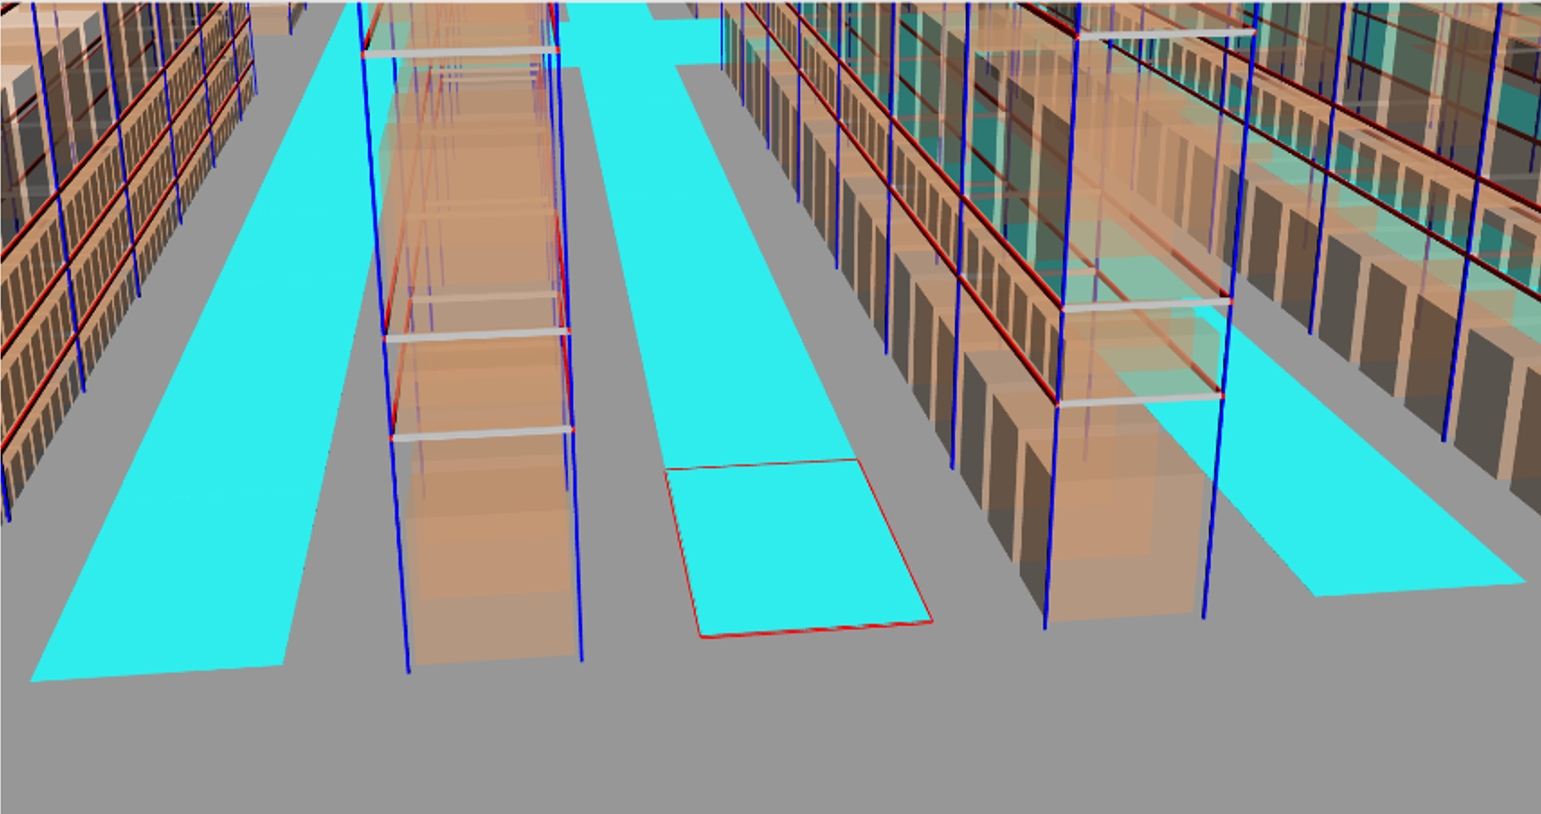 Computer generated diagram. Mapping of structures, locations and rack corridors. Visible four multi-storey brown shelves with navy blue edges and corridors that have been marked out between the shelves in blue